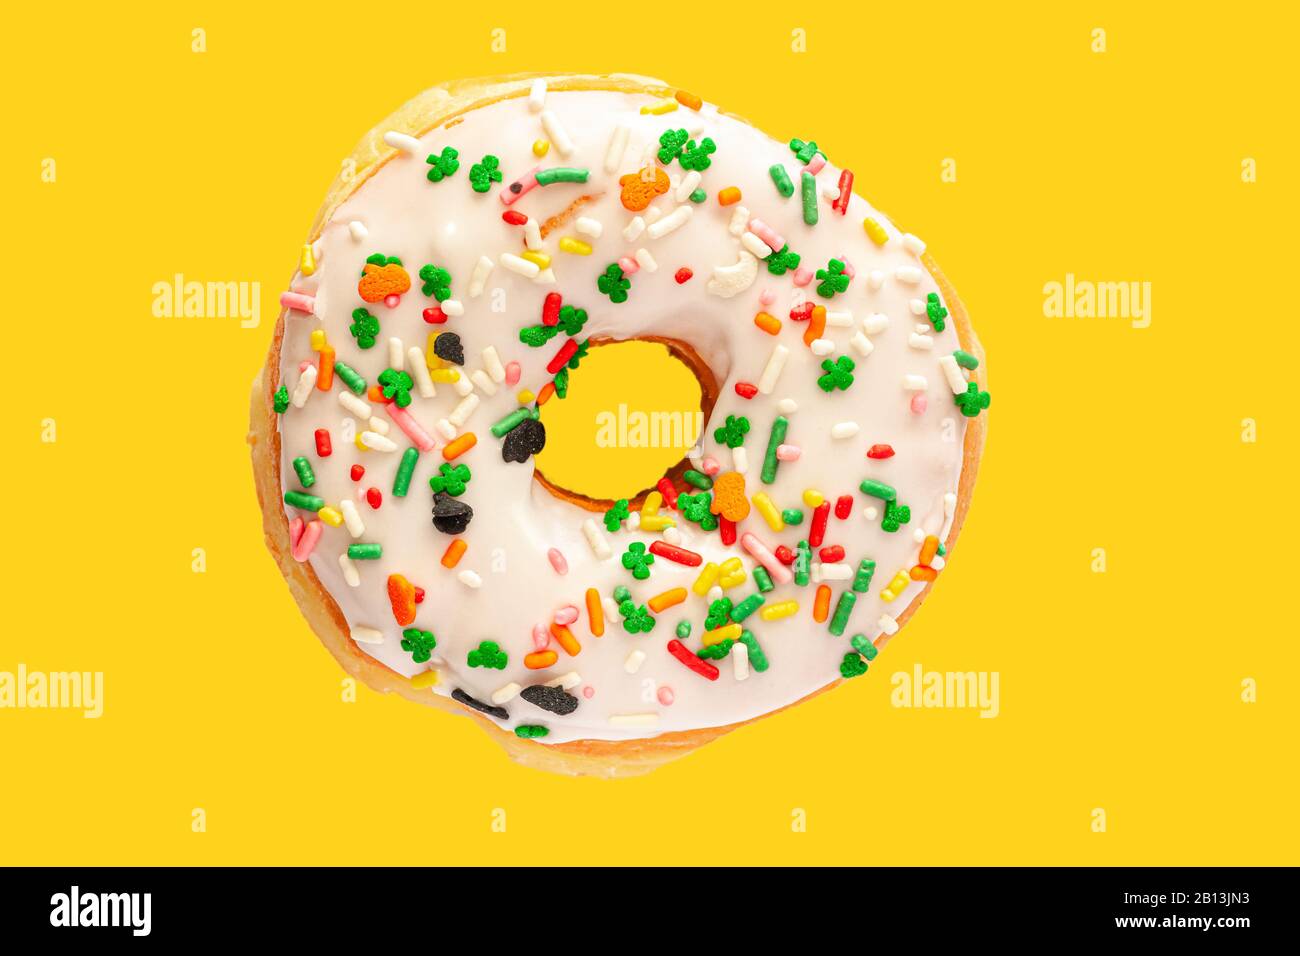 Delicious donuts with white frosting and colorful sprinkles on bright yellow background. Large close up doughnut Stock Photo